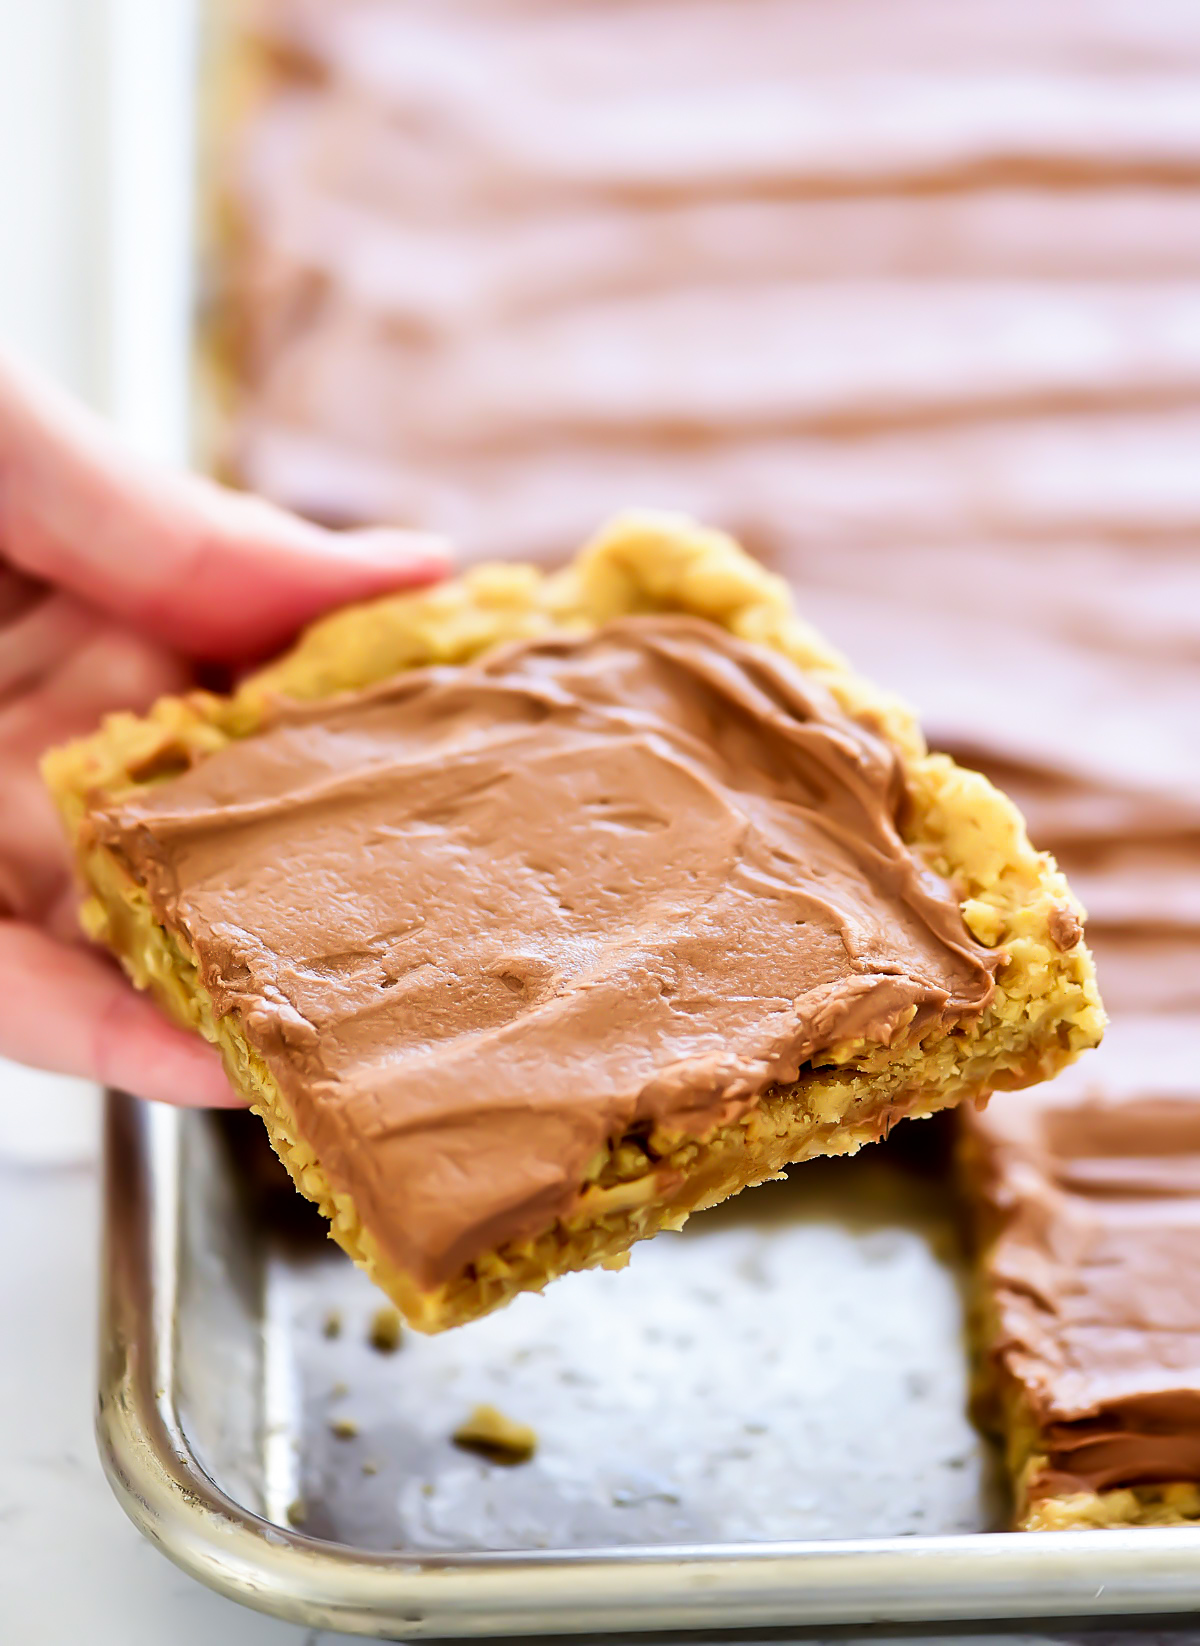 Lunch Lady Peanut Butter Bars are peanut butter cookie bars topped with chocolate frosting. Life-in-the-Lofthouse.com